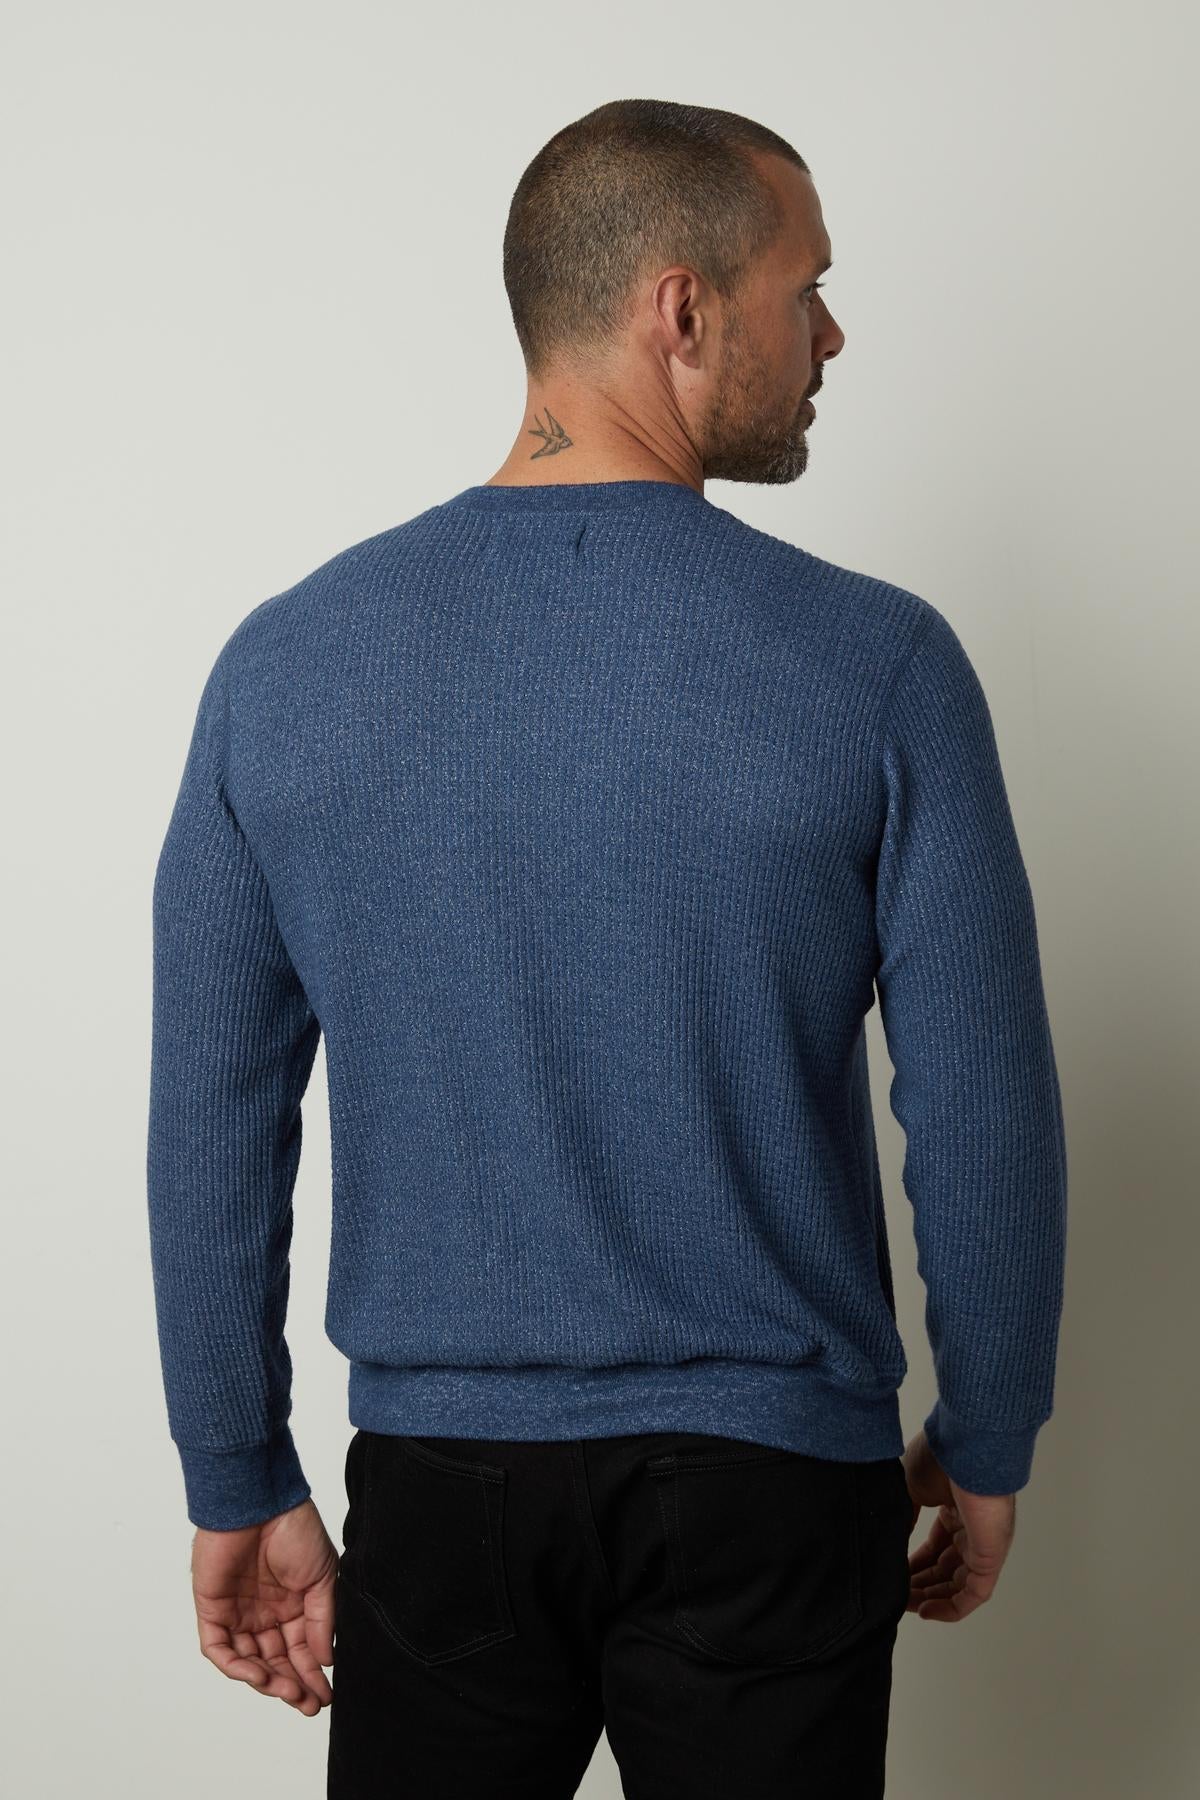 The back view of a man wearing a Velvet by Graham & Spencer PONCHO THERMAL CREW blue sweater on cooler days.-35783057178817